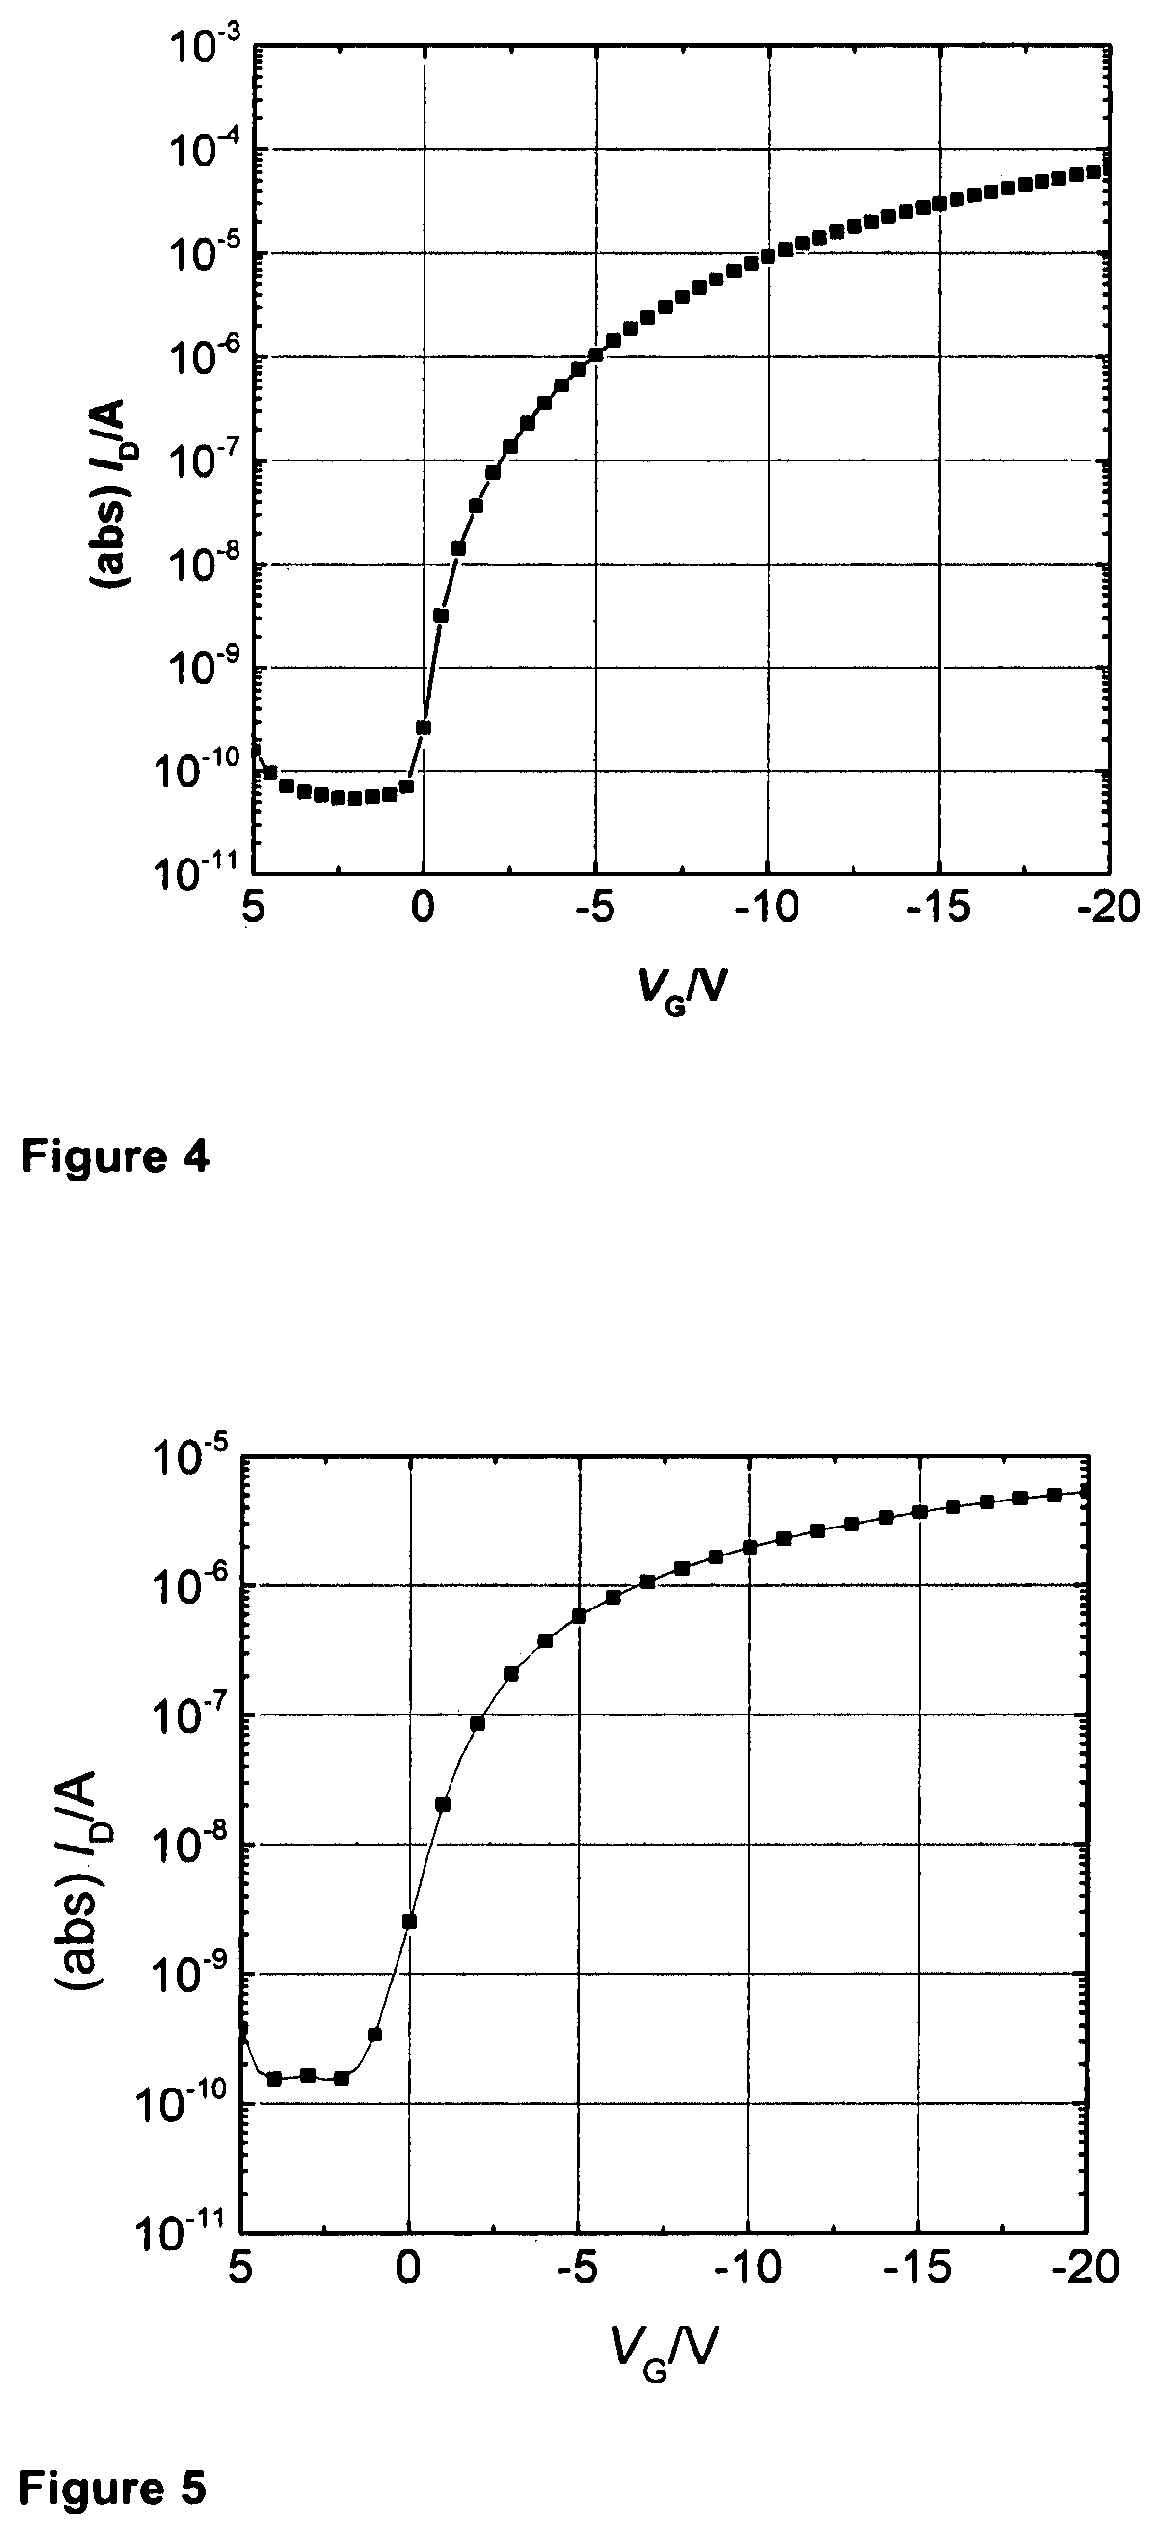 Crosslinkable polymeric materials for dielectric layers in electronic devices